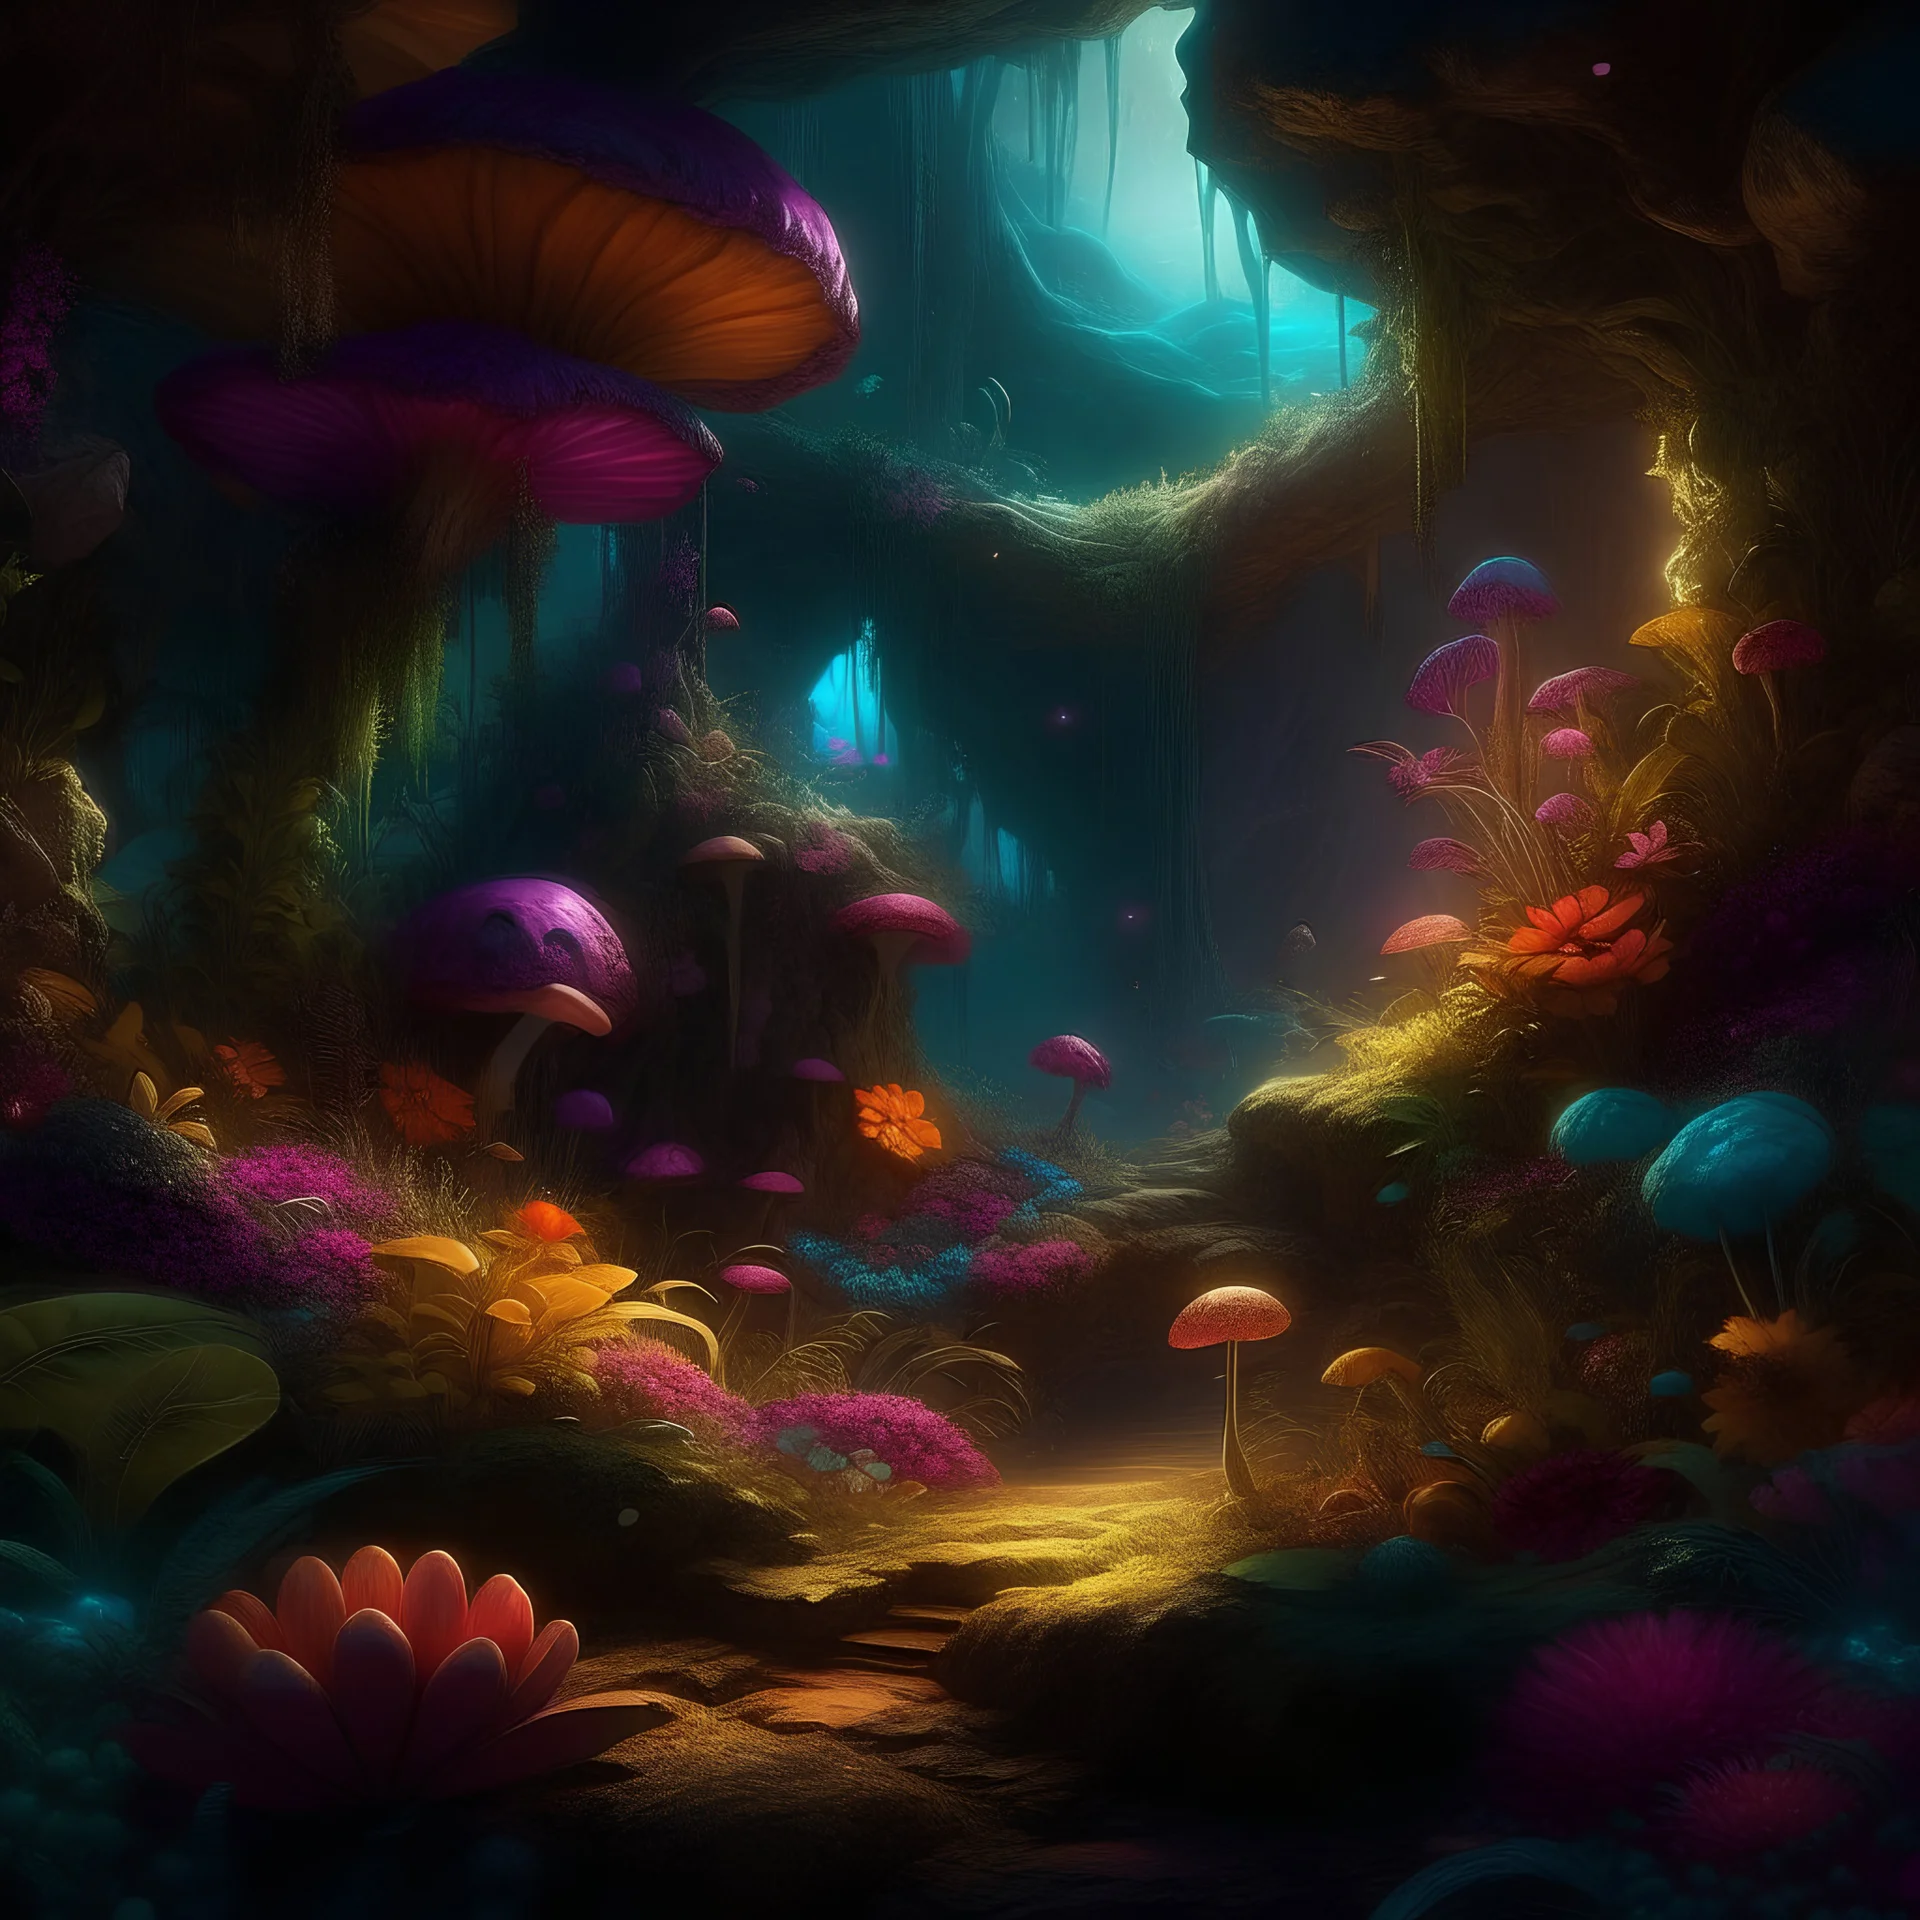 A surrealistic depiction of spring bursting with vibrant colors, fantastical elements, and a touch of magic. The scene is filled with unexpected details, rich textures, and dreamy lo-fi photography capturing every intricate detail in sharp focus. This masterpiece is reminiscent of the dark crystal movie style, blending the boundaries between photo and digital art, resembling an oil painting with visible brush strokes. The wide shot showcases the scene in stunning 4k resolution.